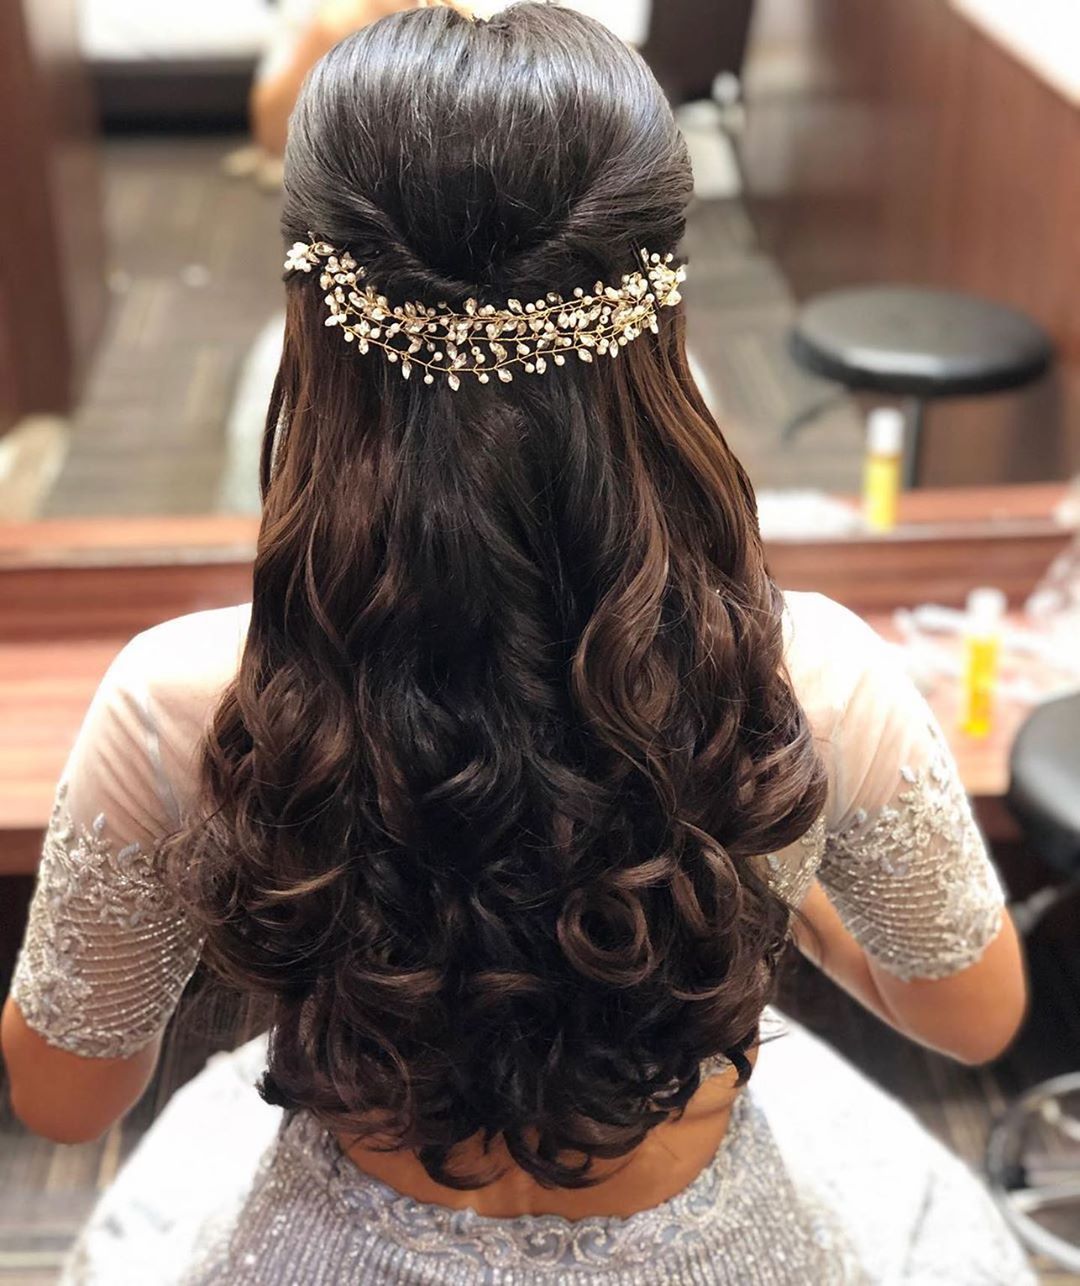 Bridal Hairstyles for the 21 Trendy Look of 2021 Wedding Season  Event  Planning Ideas Wedding Planning Tips  BookEventz Blog